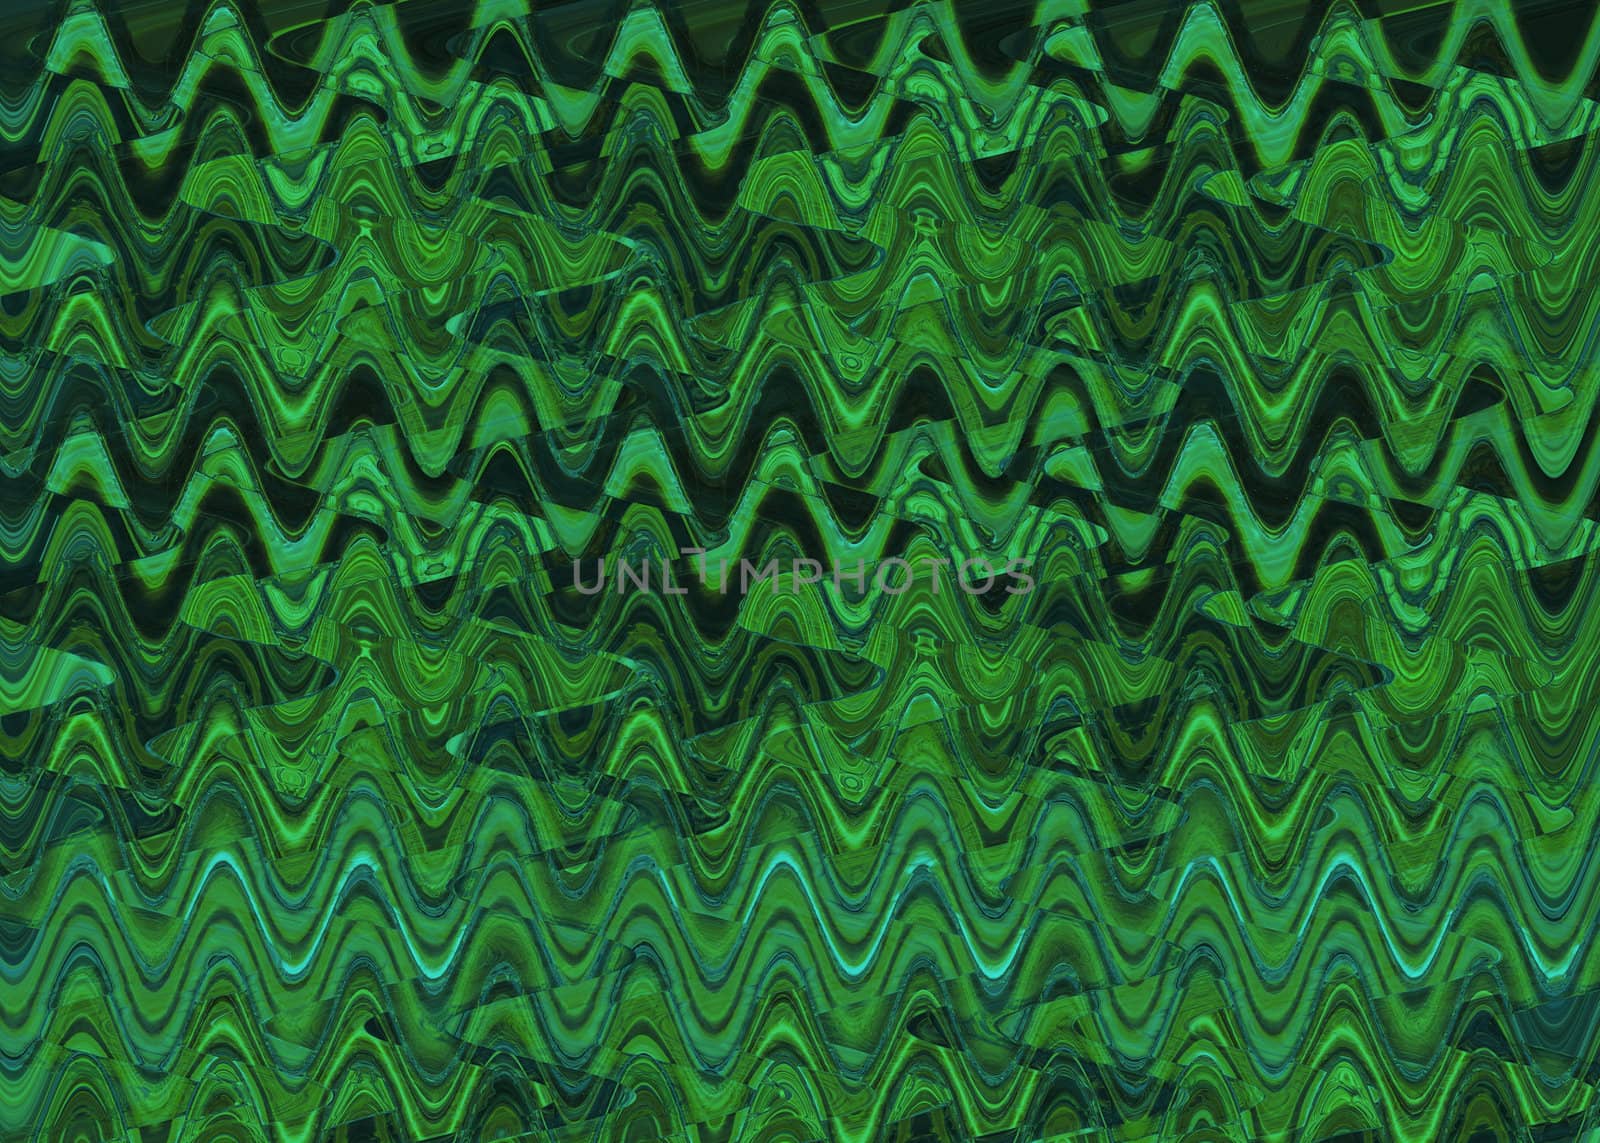 Green zig zag abstract background by ftlaudgirl